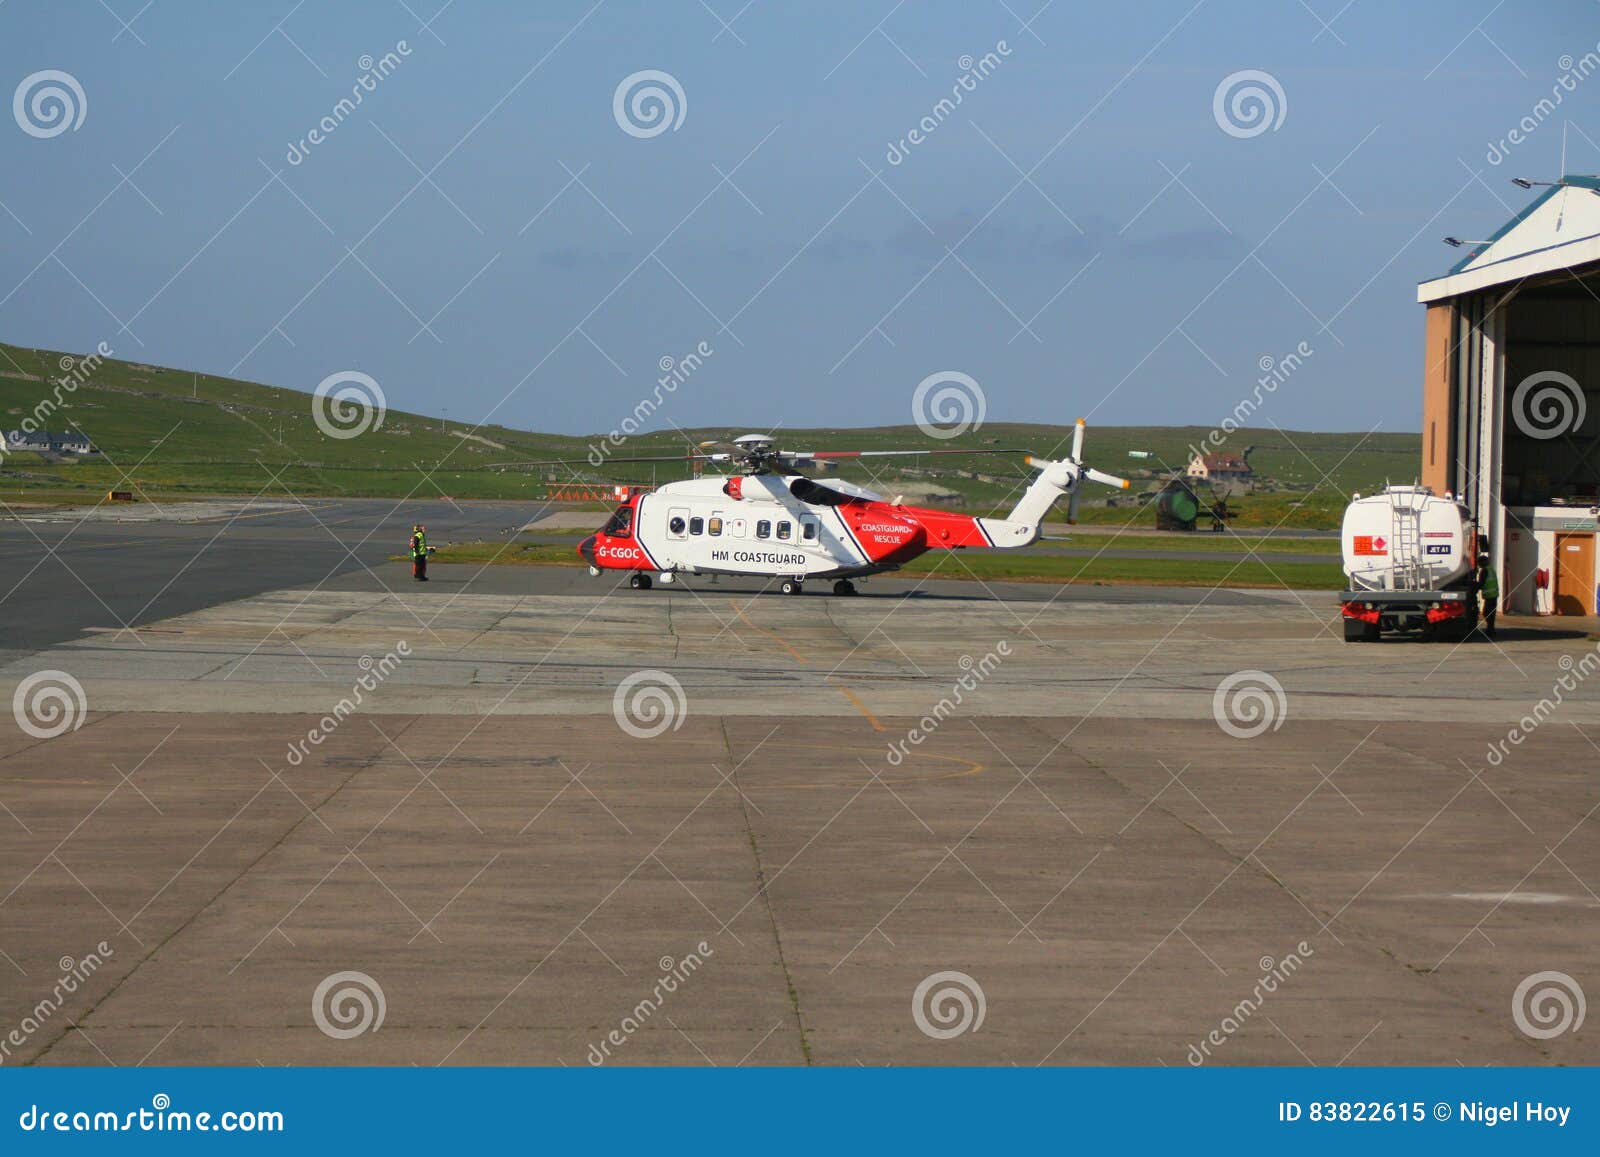 Rescue Helicopter at Airport Editorial Image - Image of transport, save: 83822615